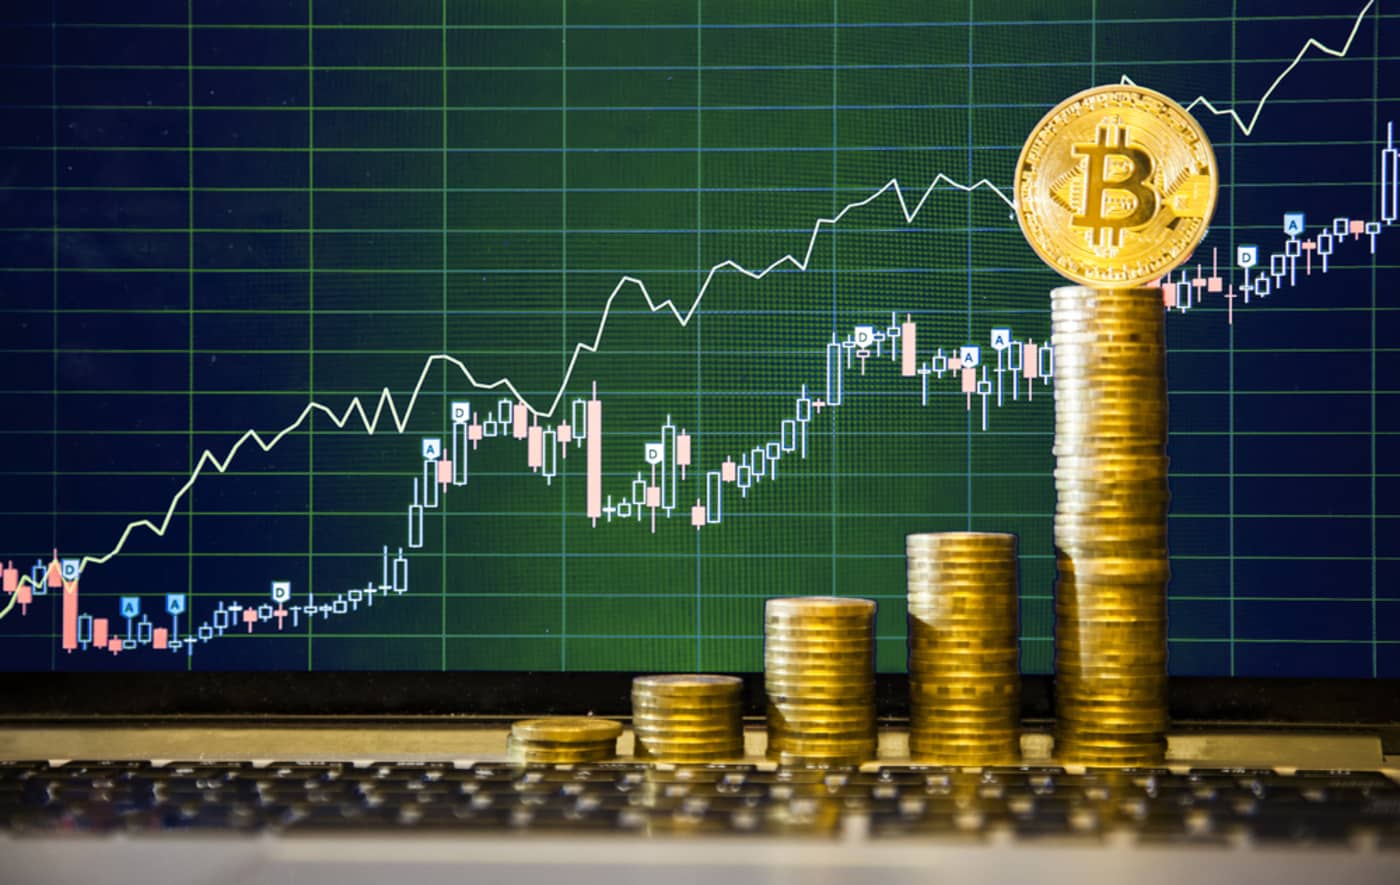 Analysts Expect Bitcoin Price Correction Before Rally